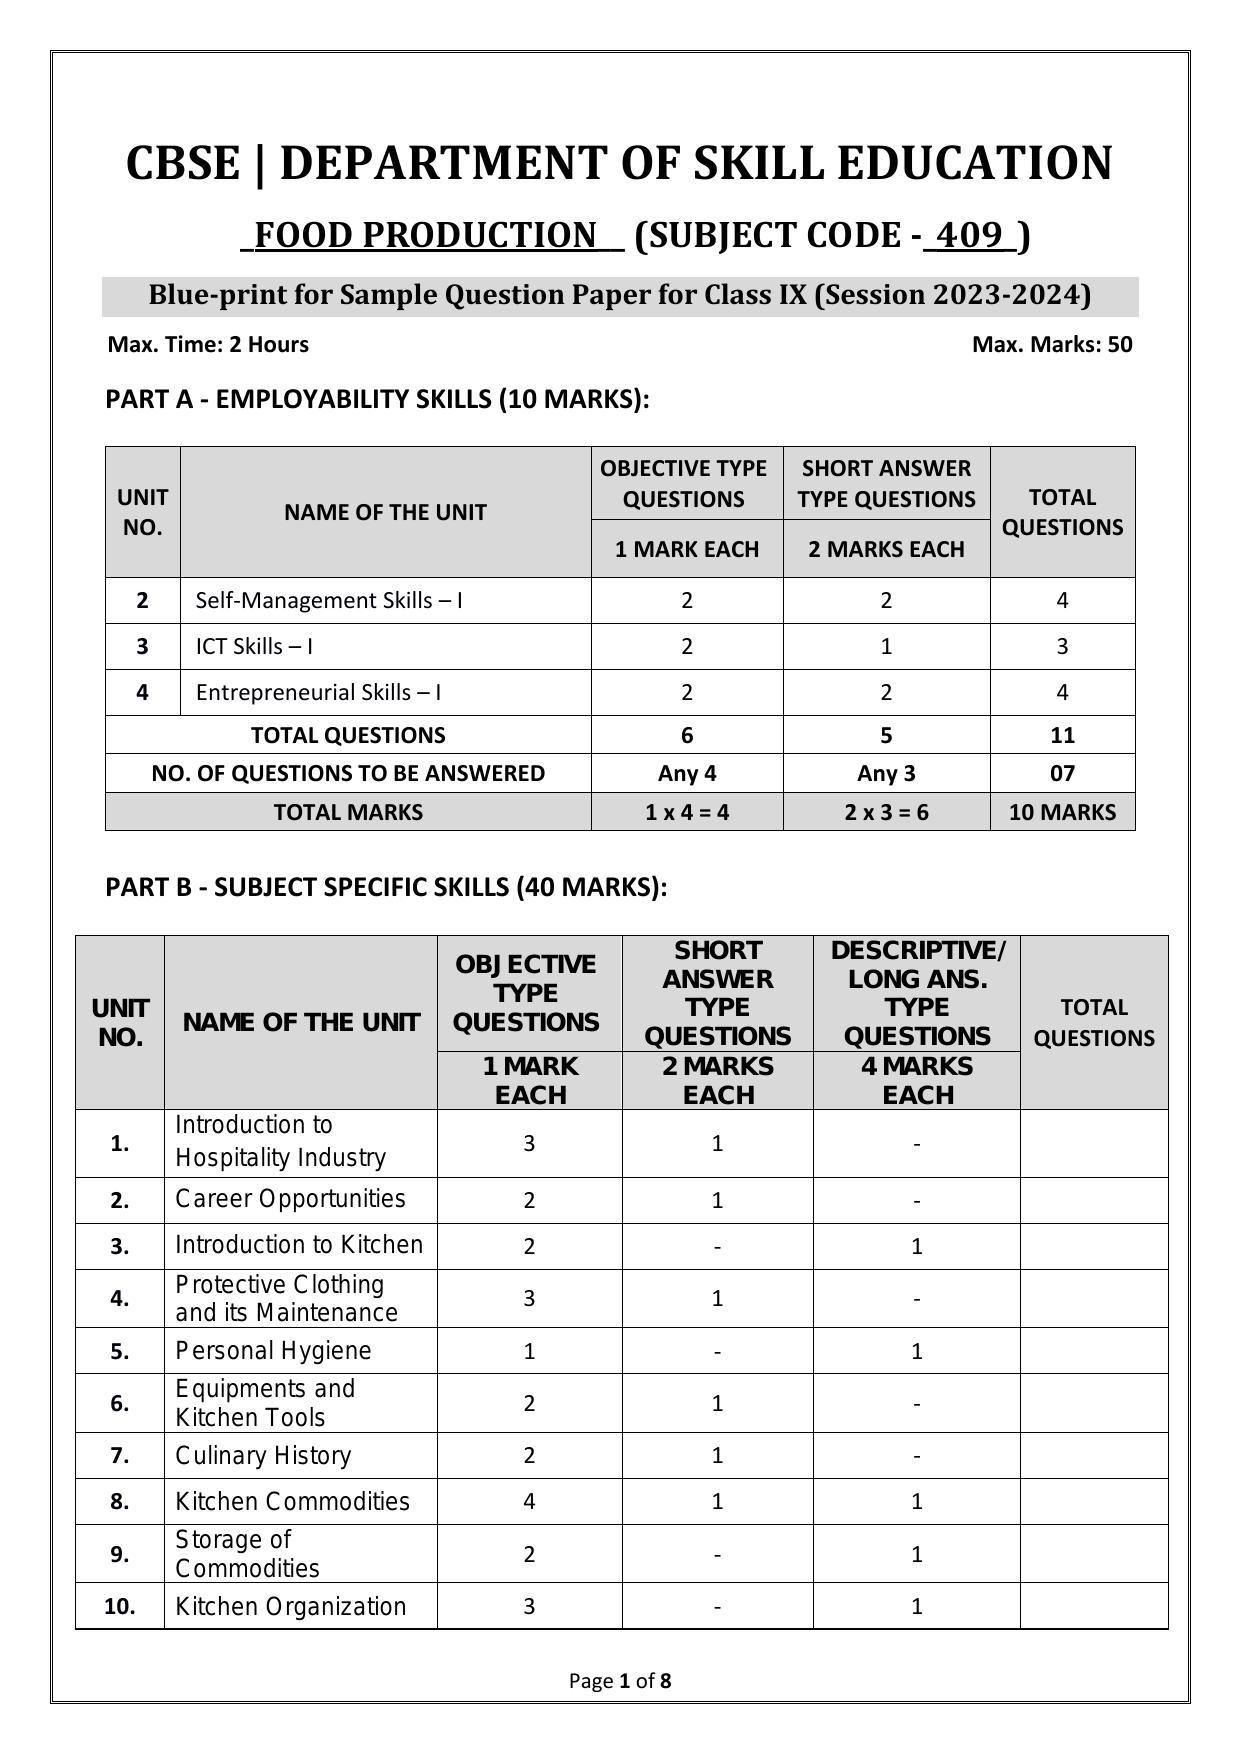 CBSE Class 9 Food Production Skill Education-Sample Paper 2024 - Page 1